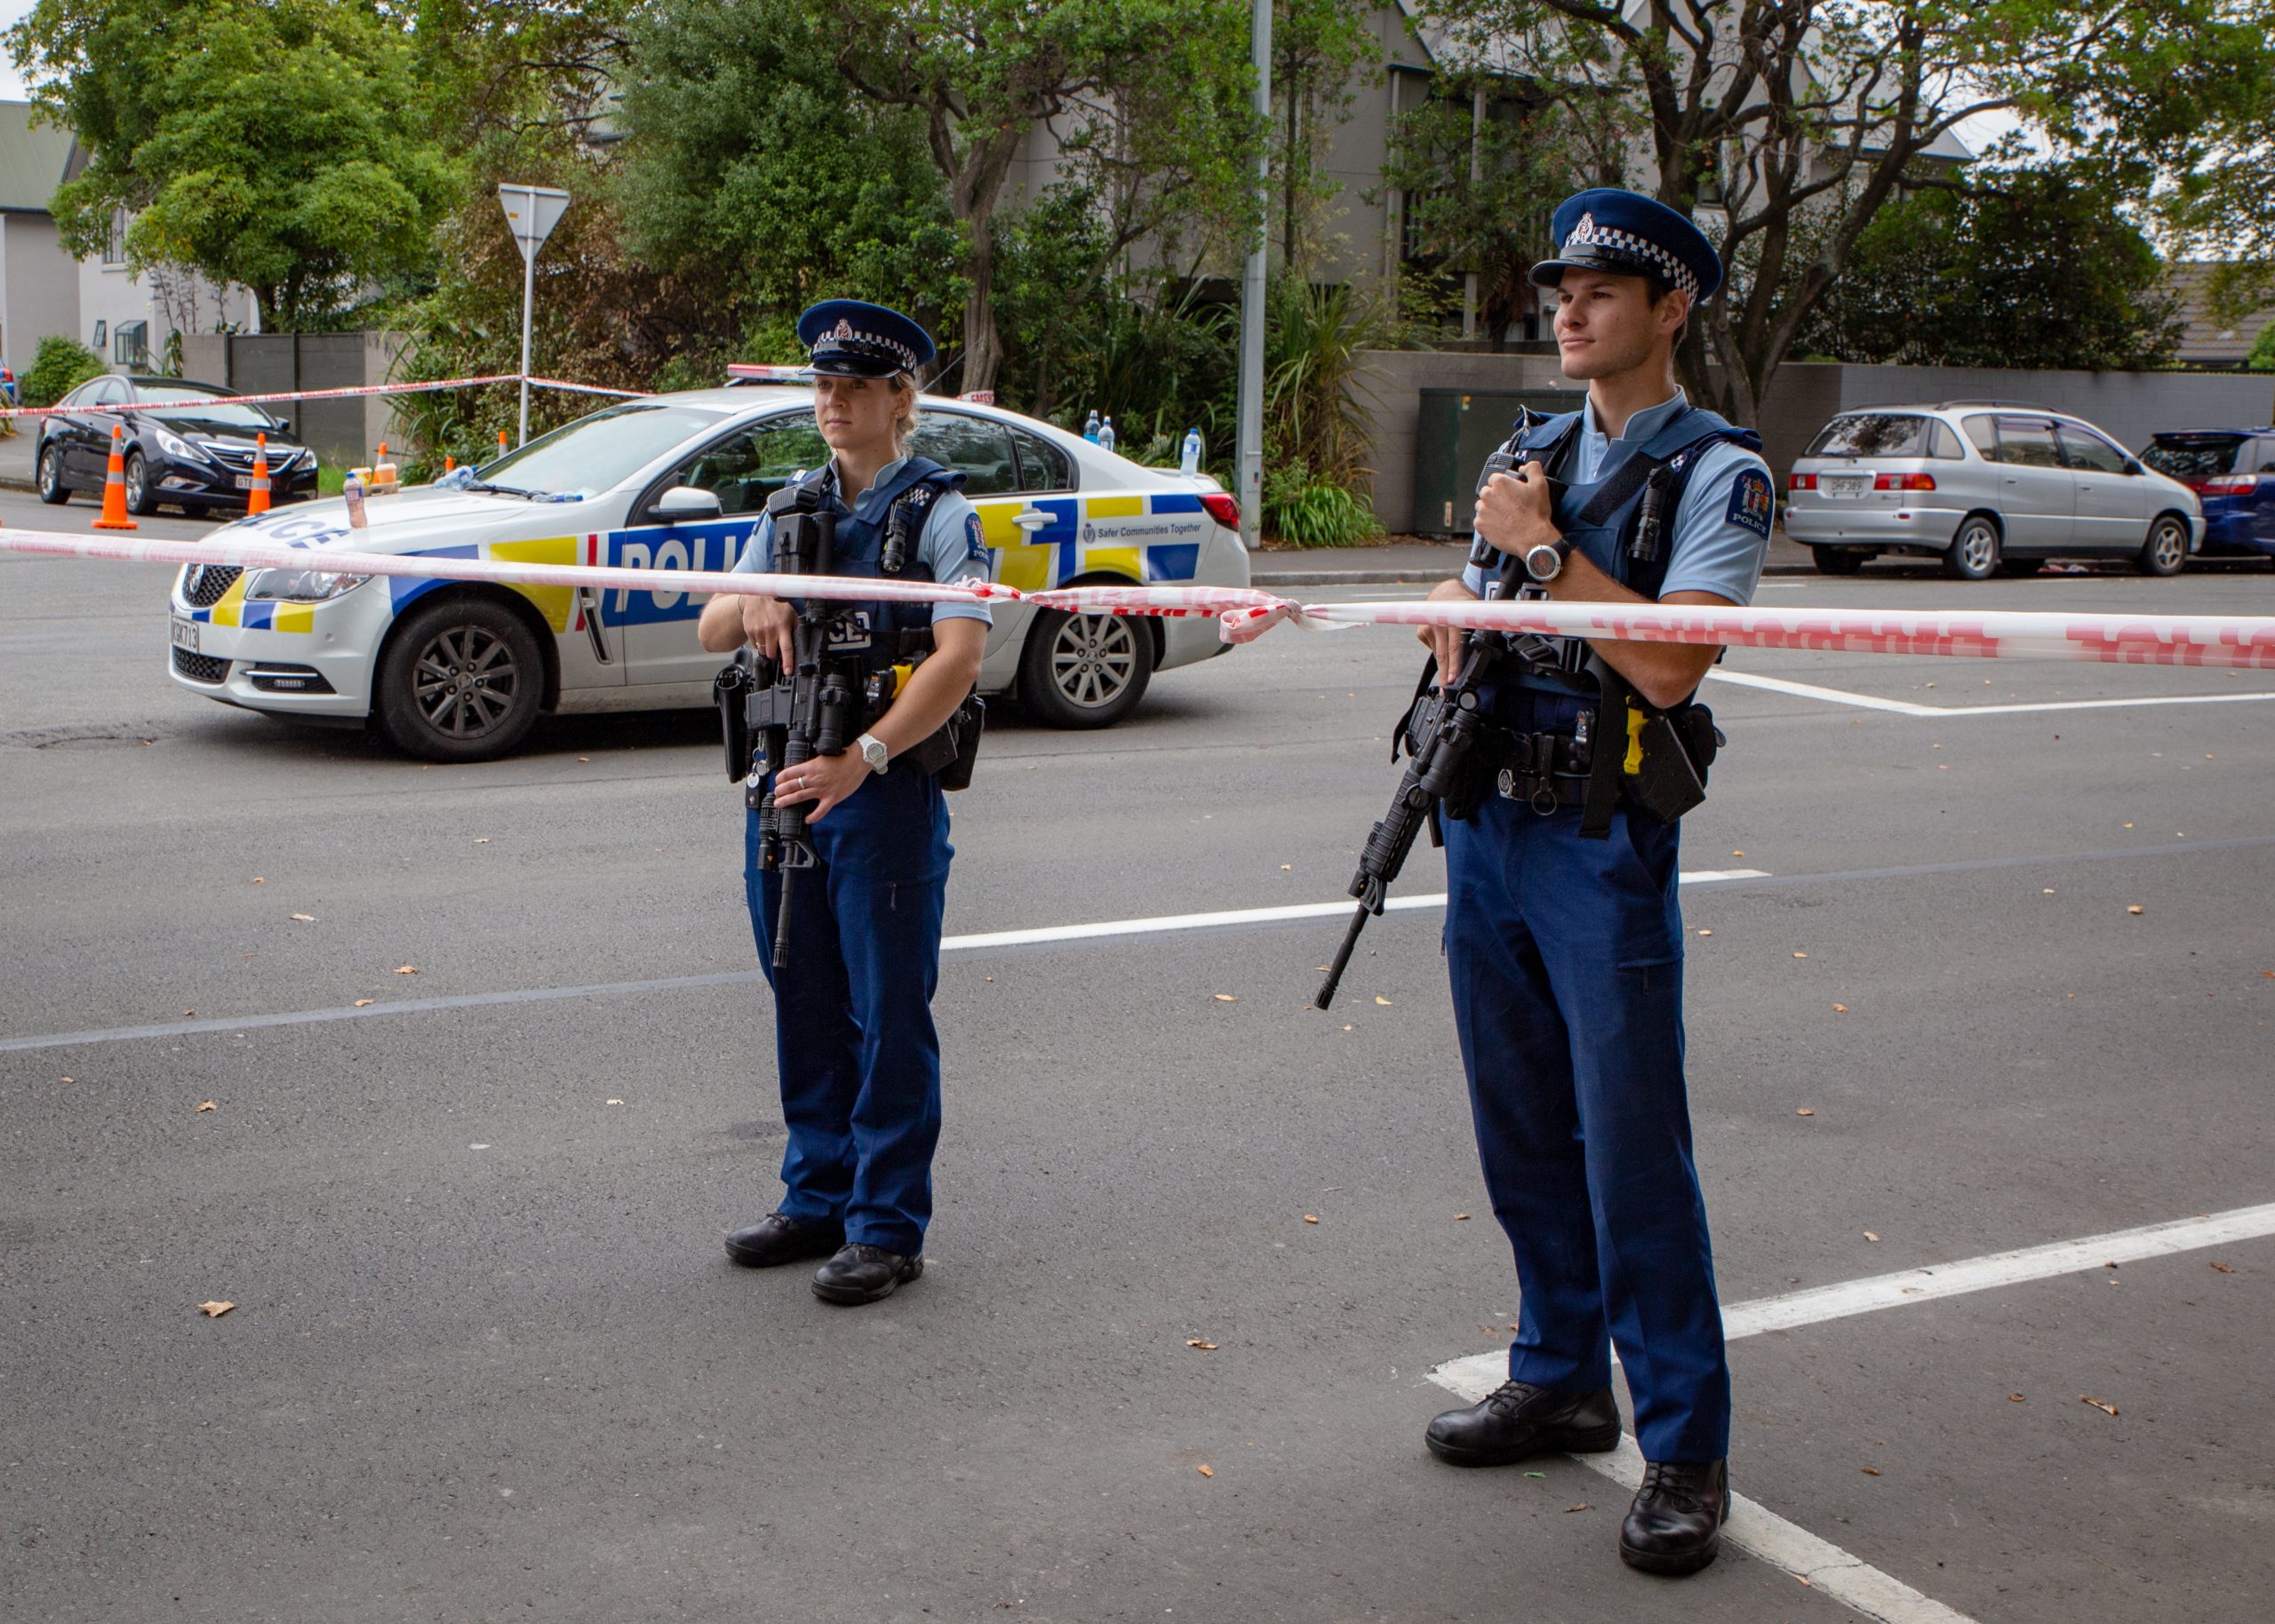 New Zealand attacker radicalised by neighbours, mother says